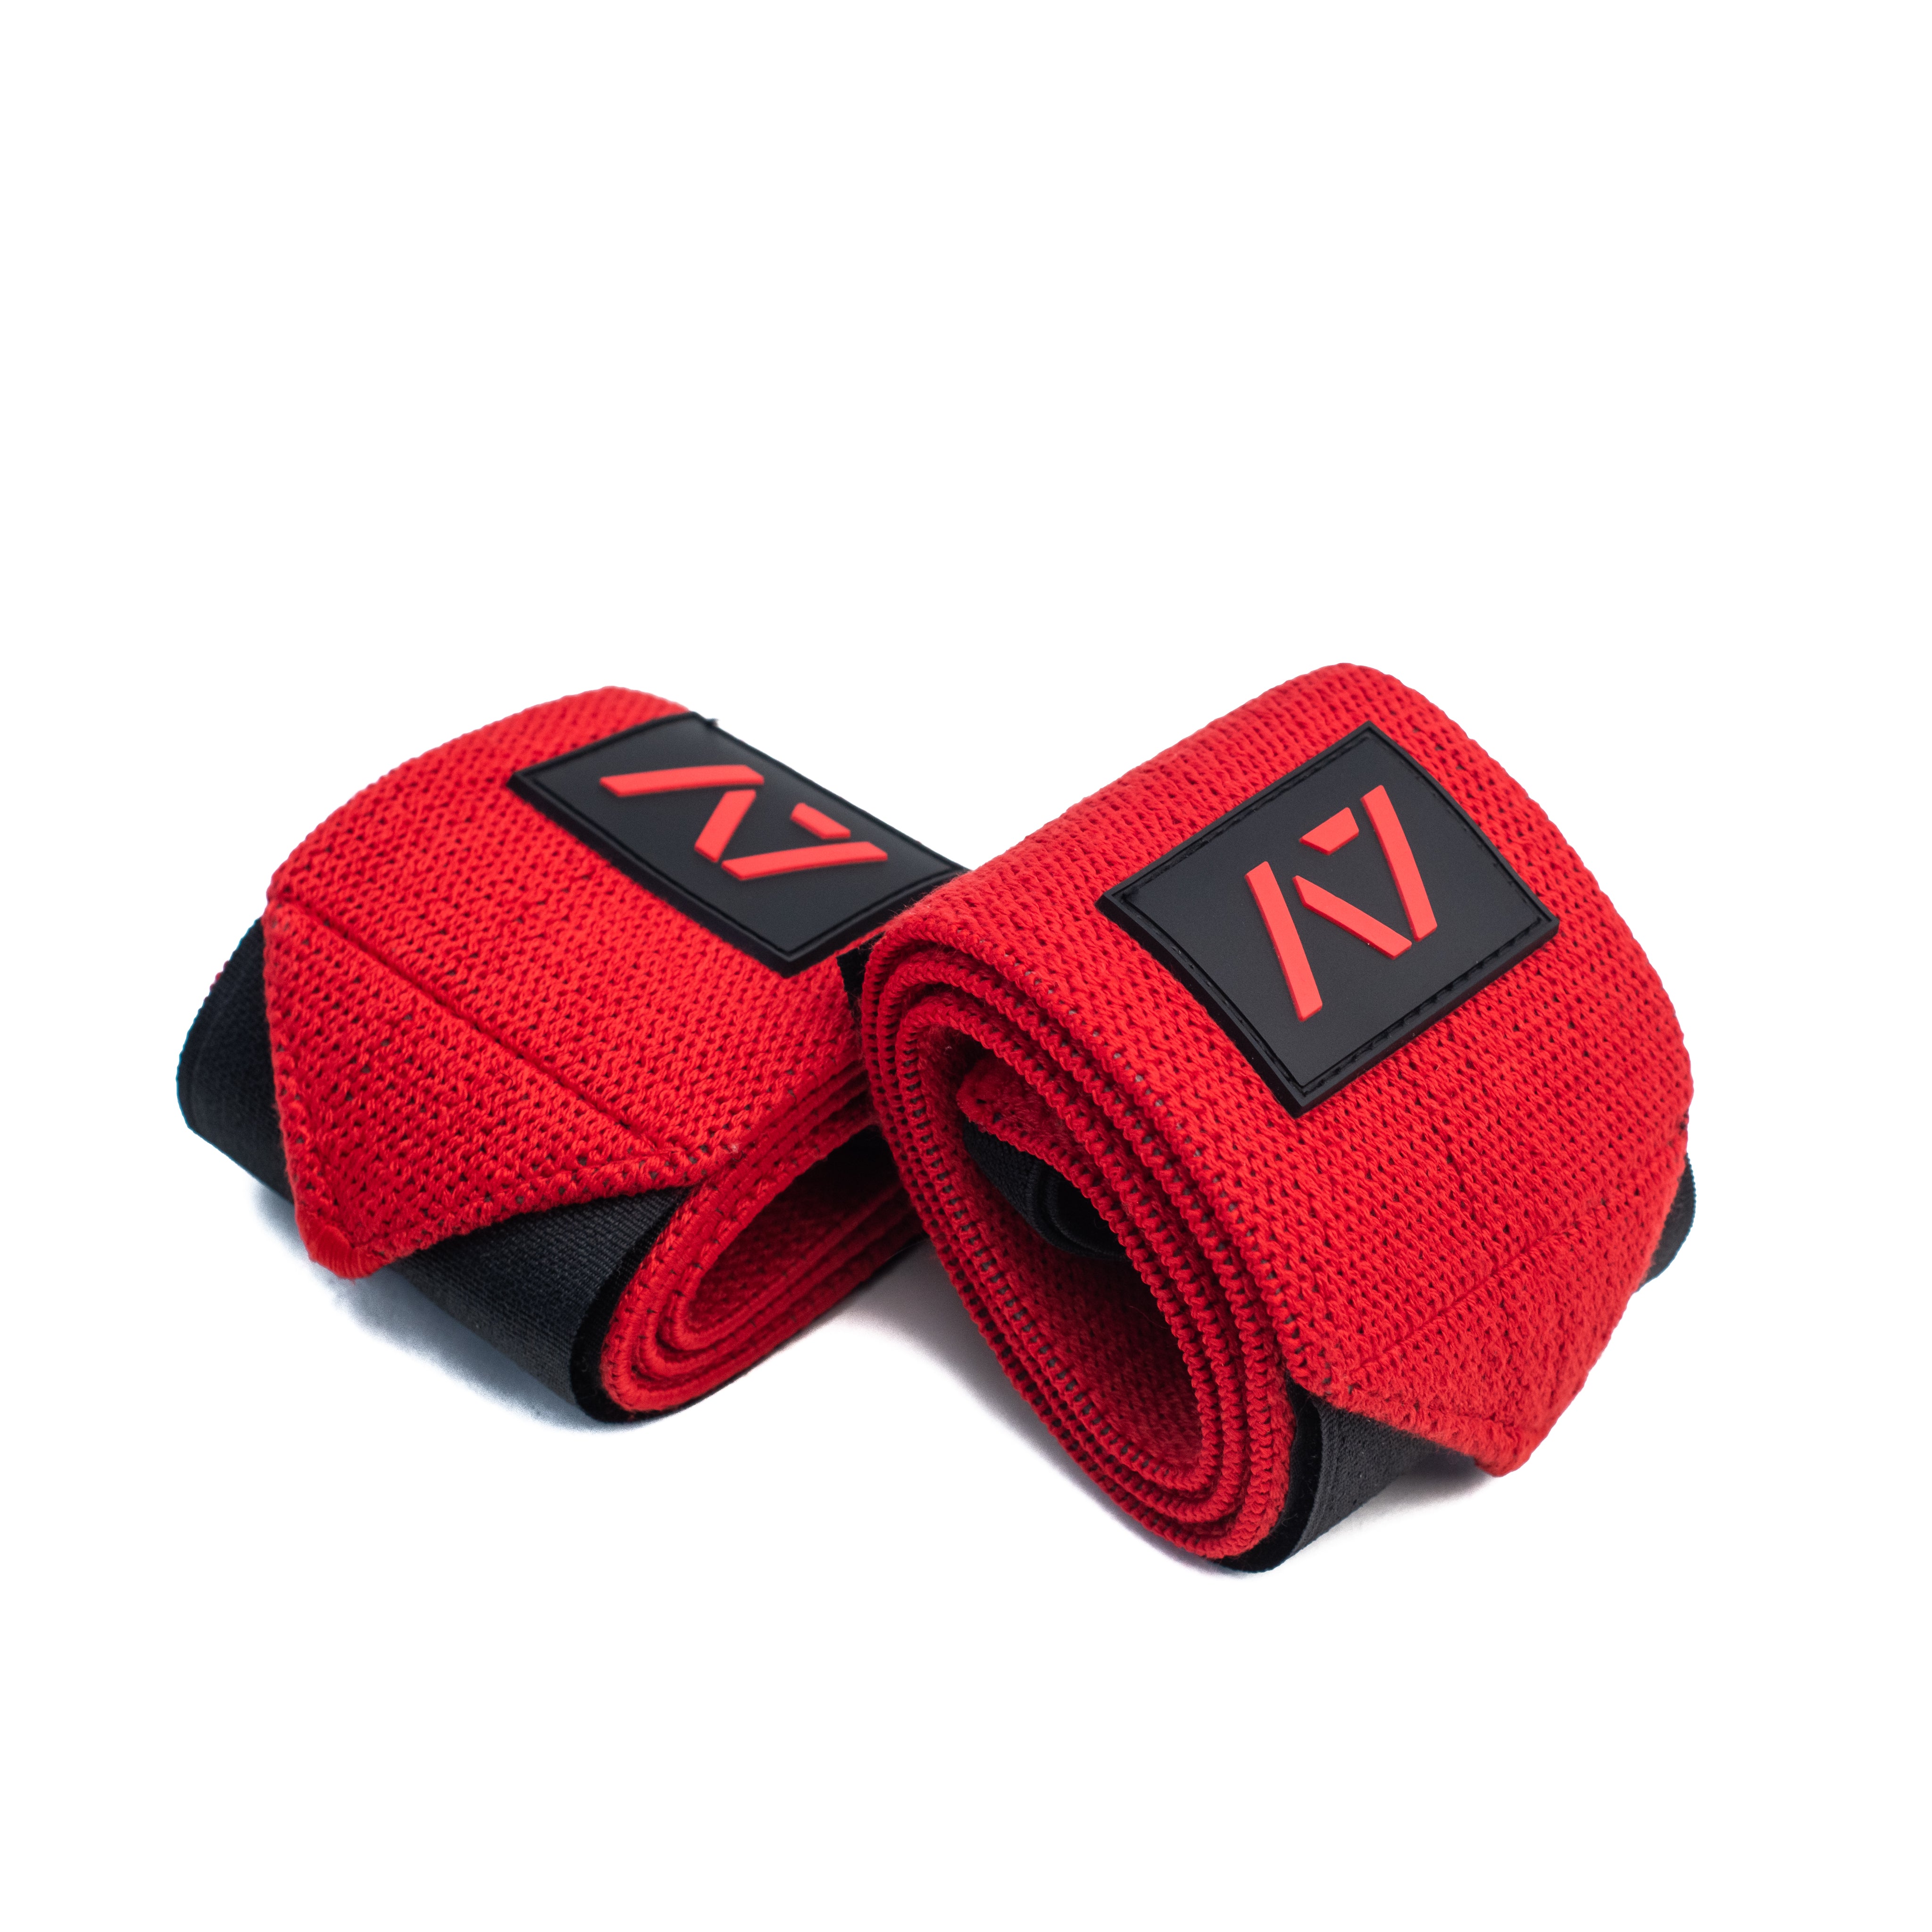 A7 Wrist Wraps are IPF approved. Inferno is the newest color combination to our Wrist Wraps. The classic black and red colorway you all loved in our FIRE USA meet tee can now partner with these wraps for a standout look like no other. Excited to see you set some new PBs in these wraps and show off your Inferno spirt from within. These wrist wraps are a perfect addition to your IPF approved kit.